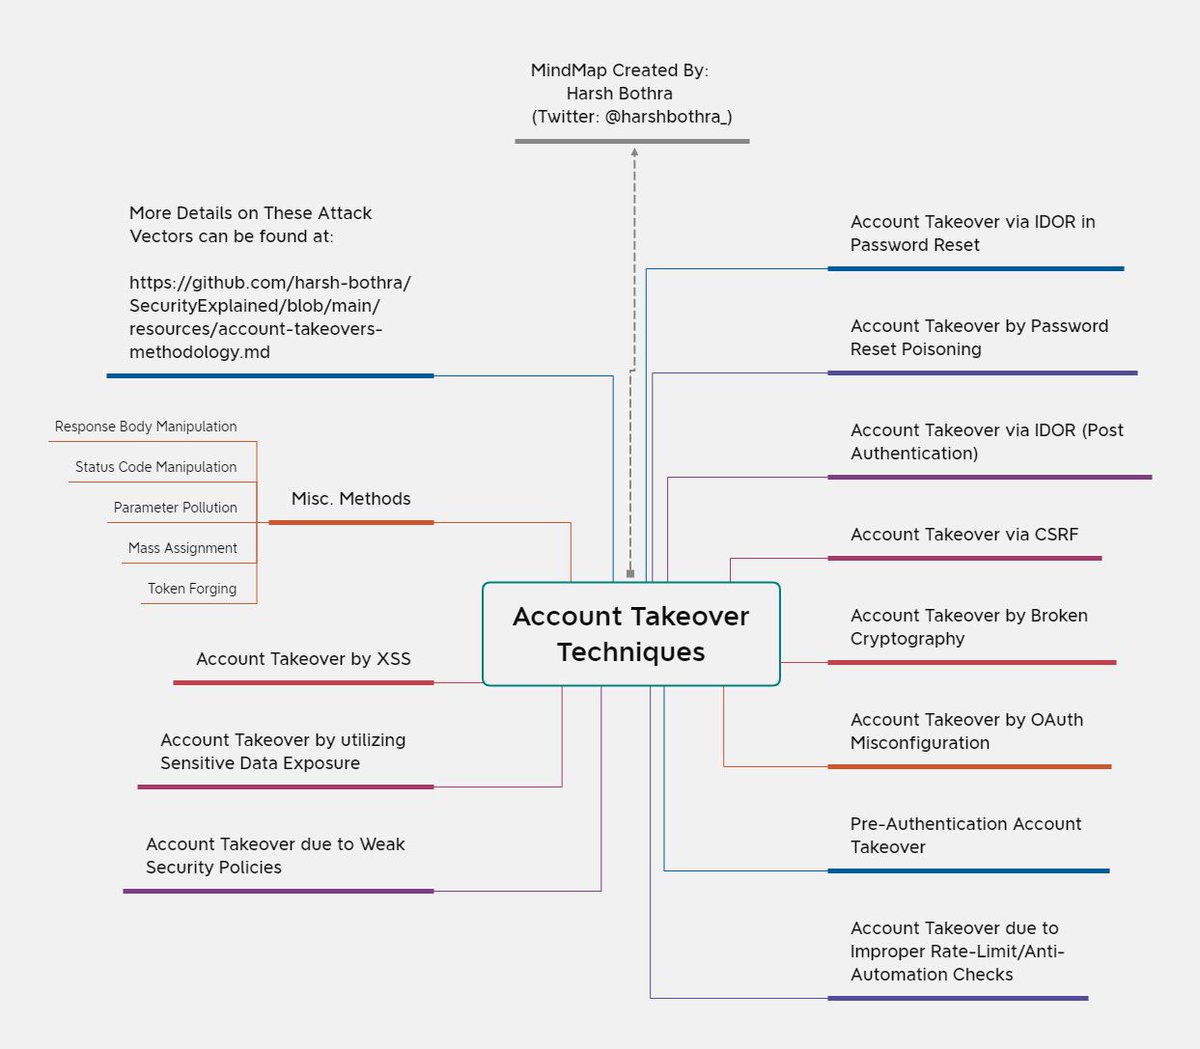 Account Takeover Techniques : Mindmap Created By @harshbothra_ #cybersec #bugbounty #bughunting #infosec #appsec #bugbountytip #vapt #accounttakeover